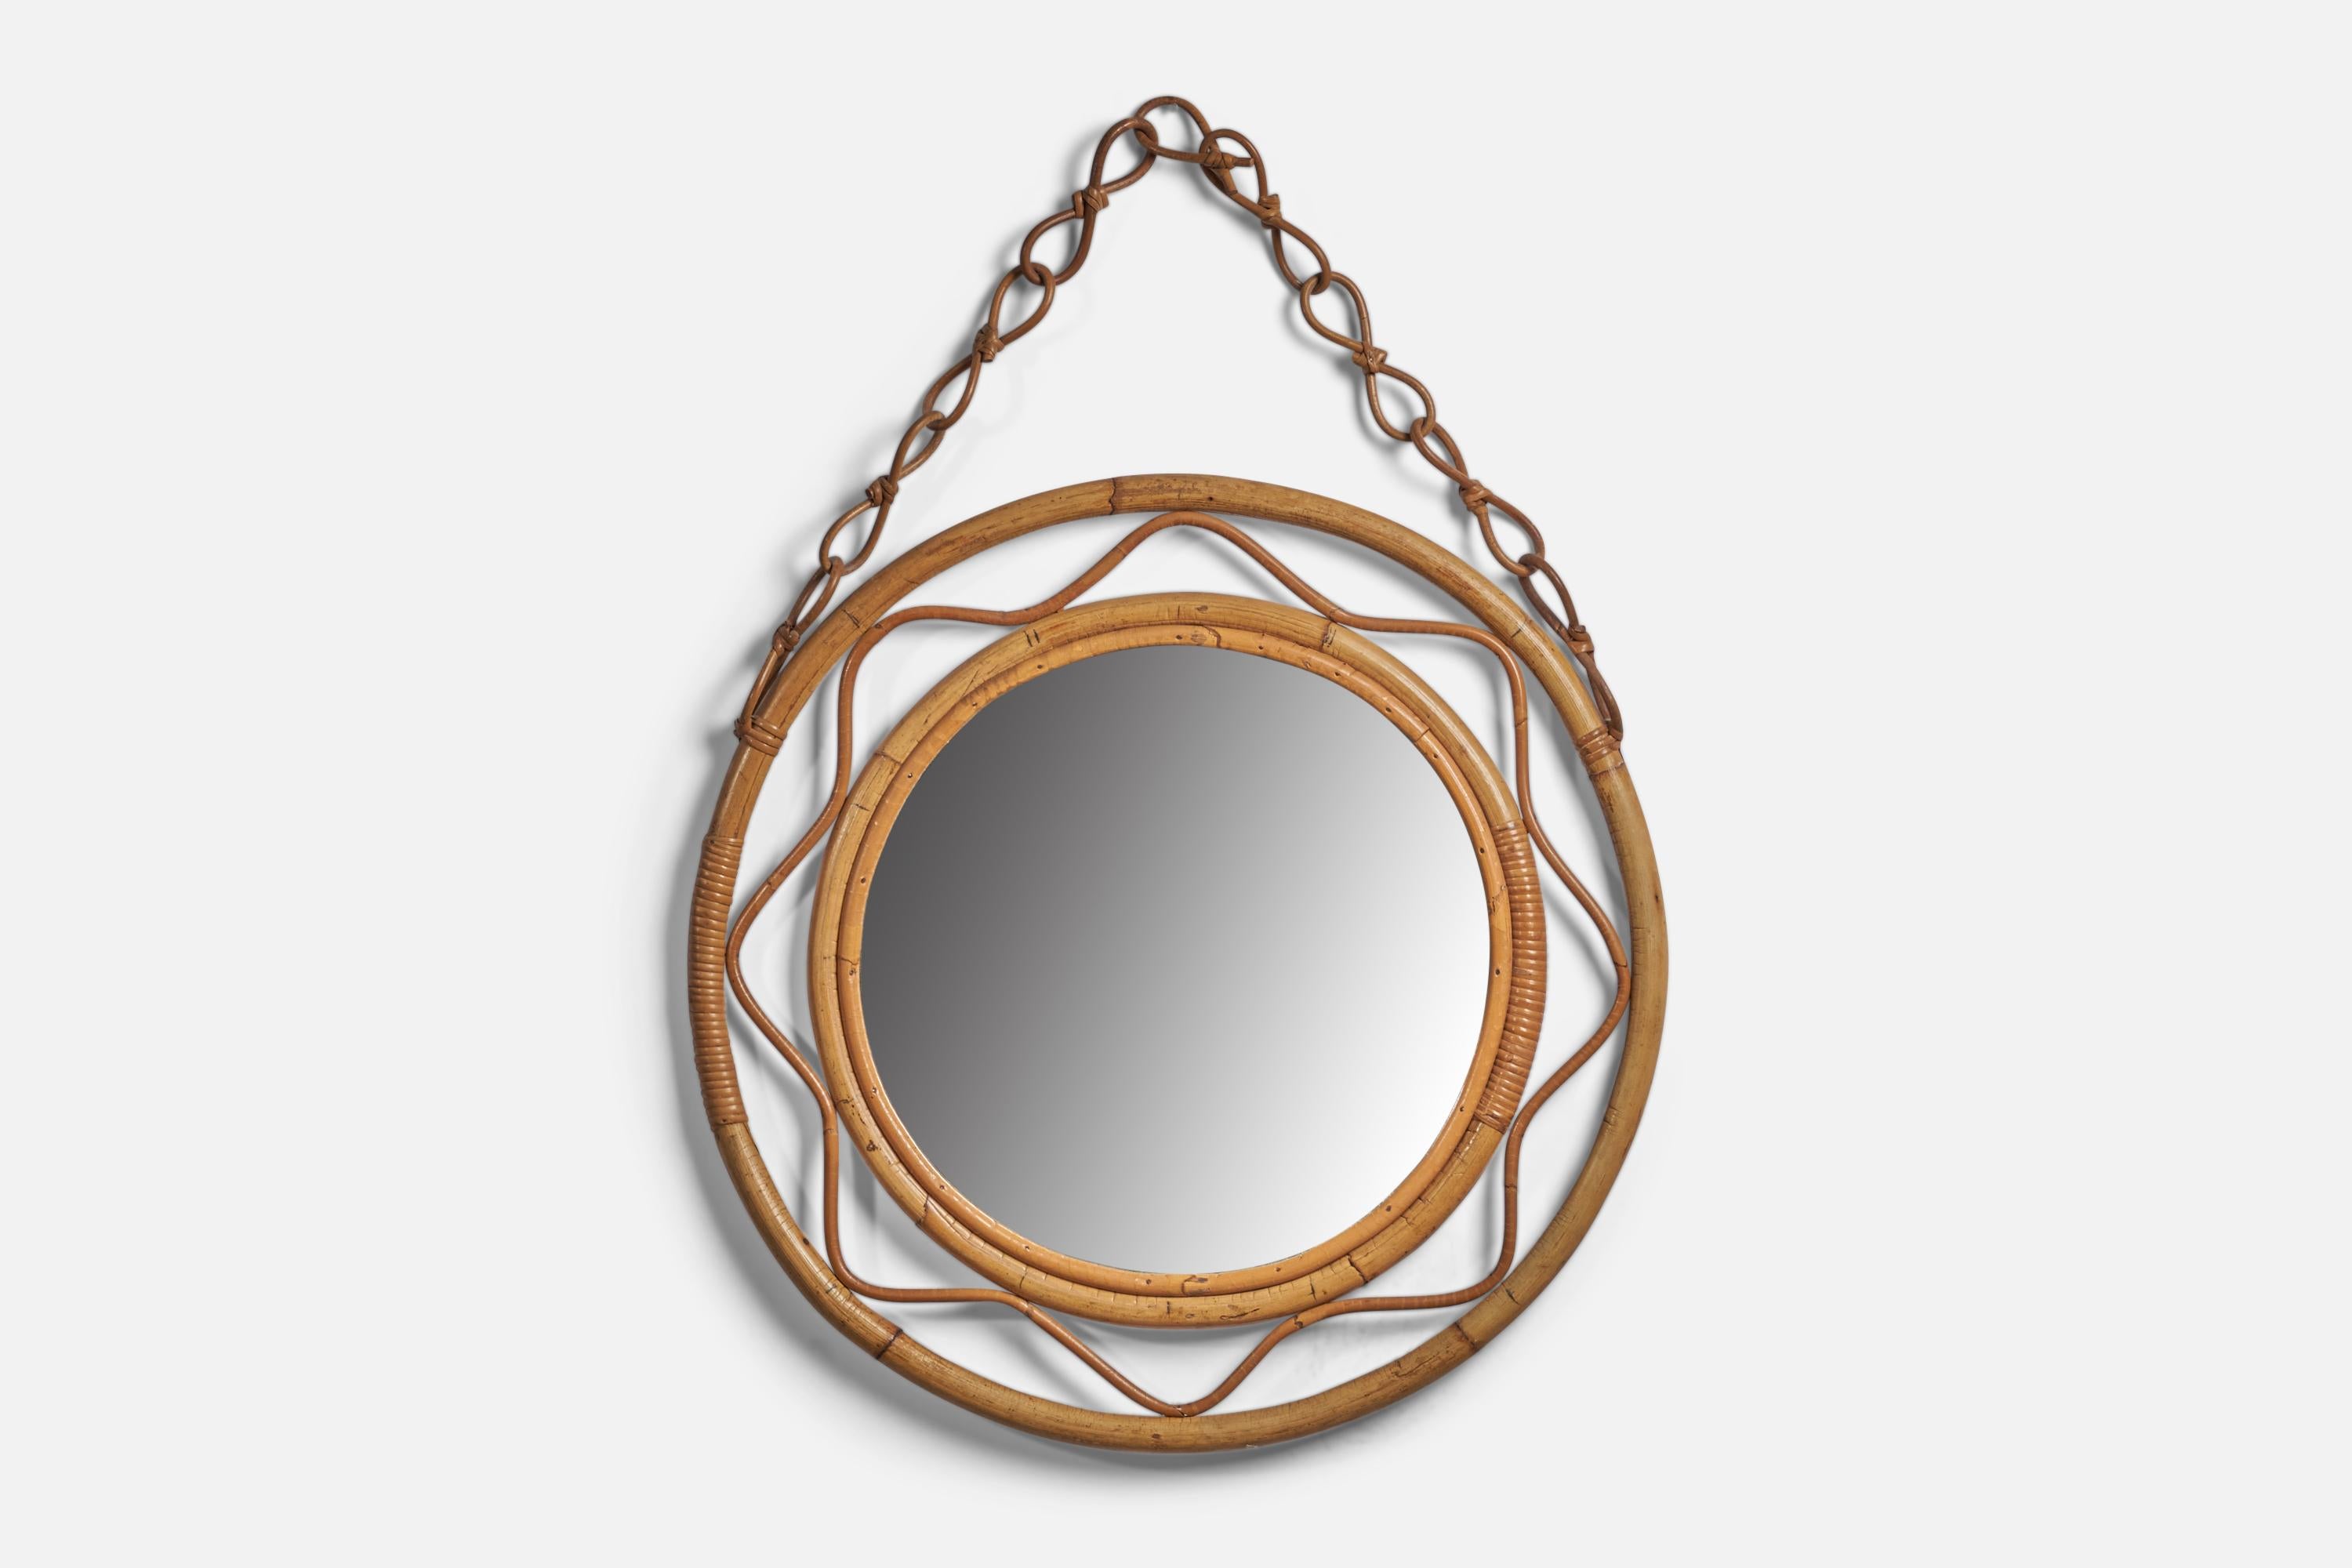 A rattan and bamboo wall mirror, designed and produced in Italy, 1950s

Chain adds 9